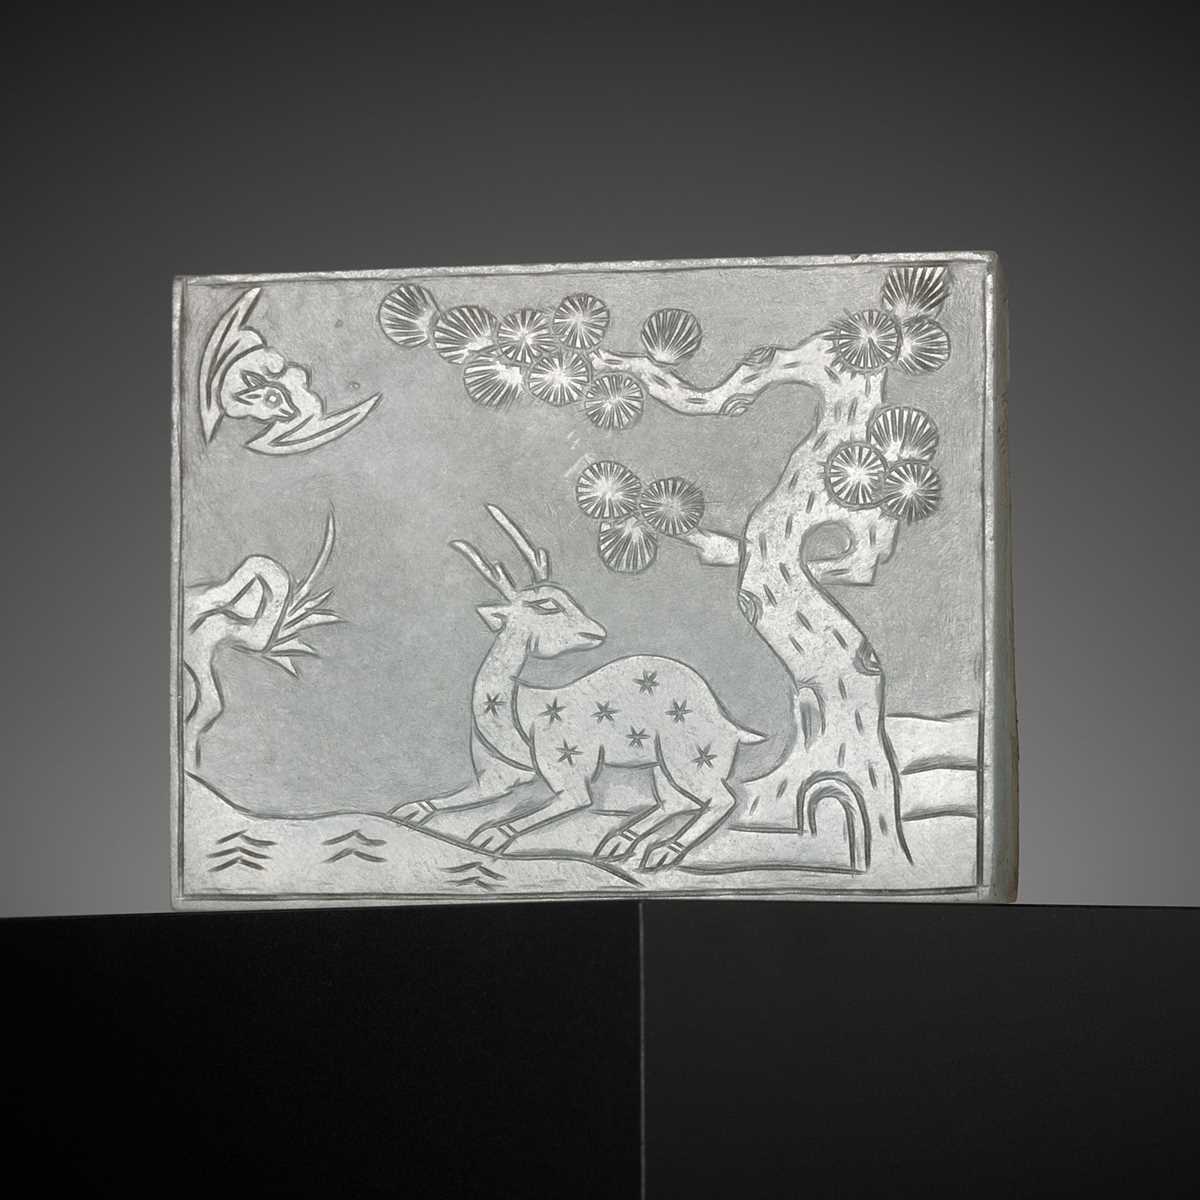 Lot 90 - A PALE CELADON JADE BELT PLAQUE, LATE MING TO EARLY QING DYNASTY